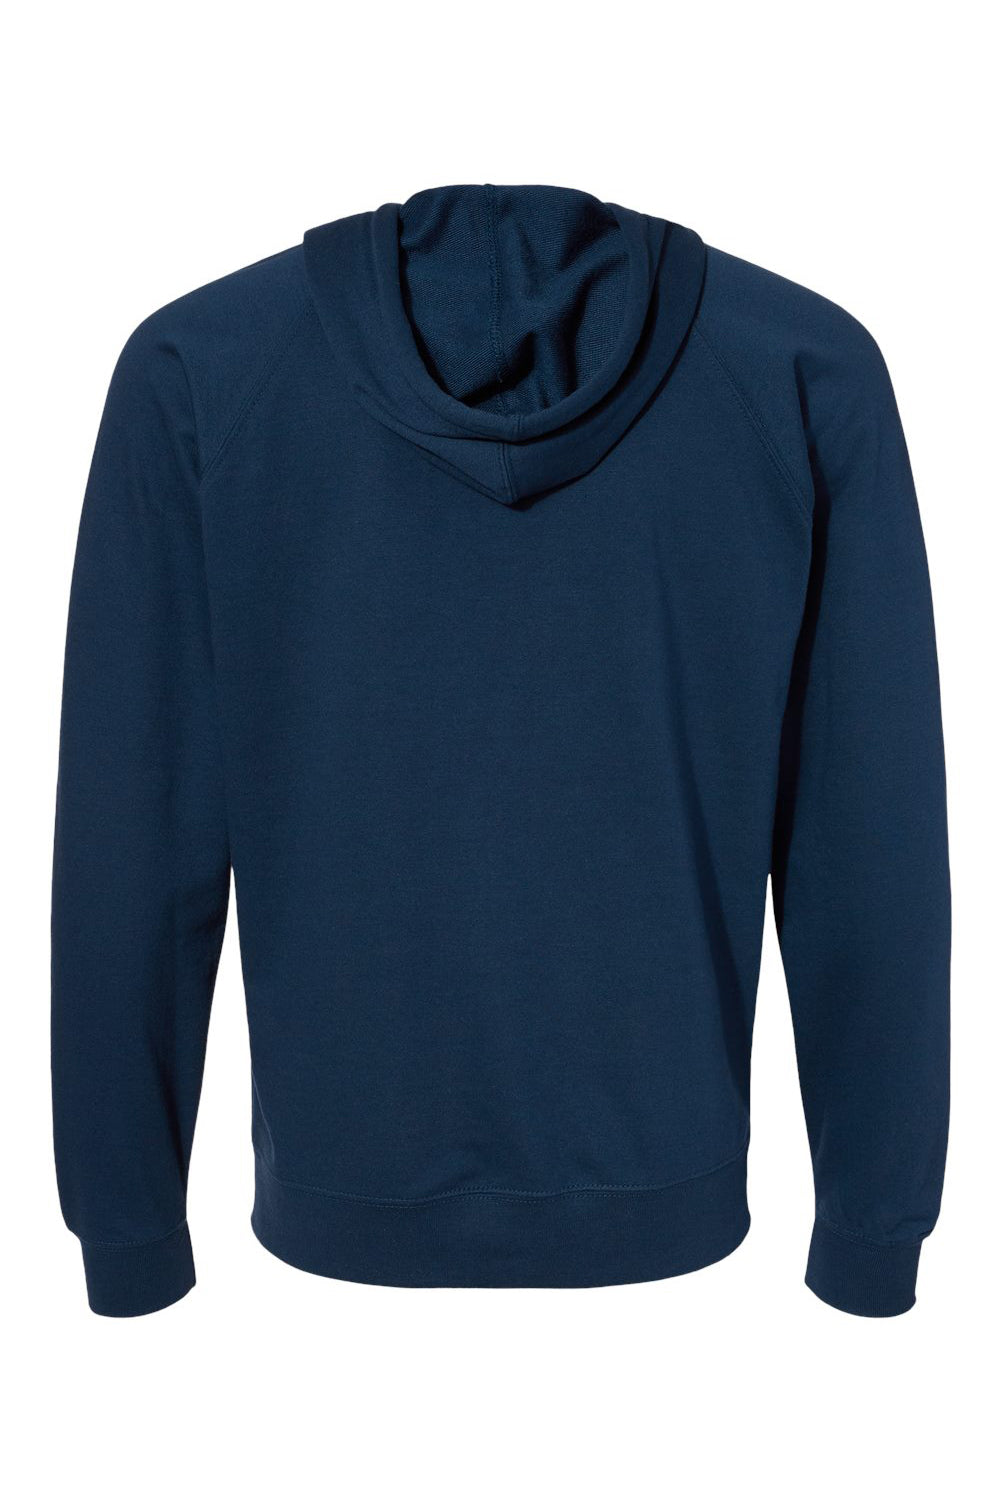 Independent Trading Co. SS1000Z Mens Icon Loopback Terry Full Zip Hooded Sweatshirt Hoodie Indigo Blue Flat Back